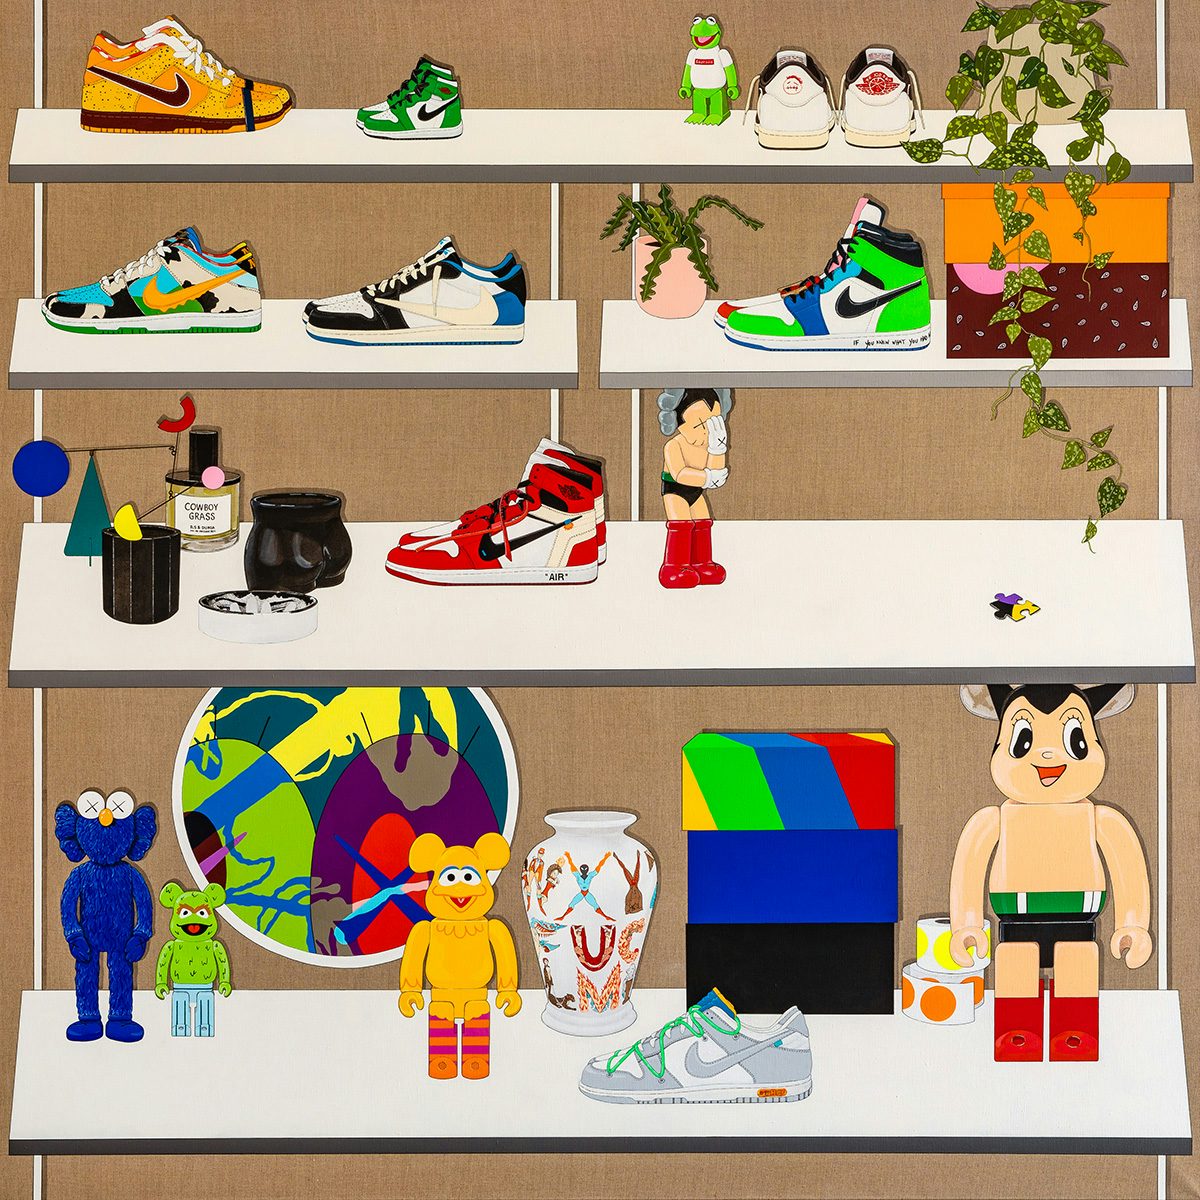 Painting by Sooyoung Chung showing objects arranged across four shelves, including Kaws figurines and colourful Nike trainers